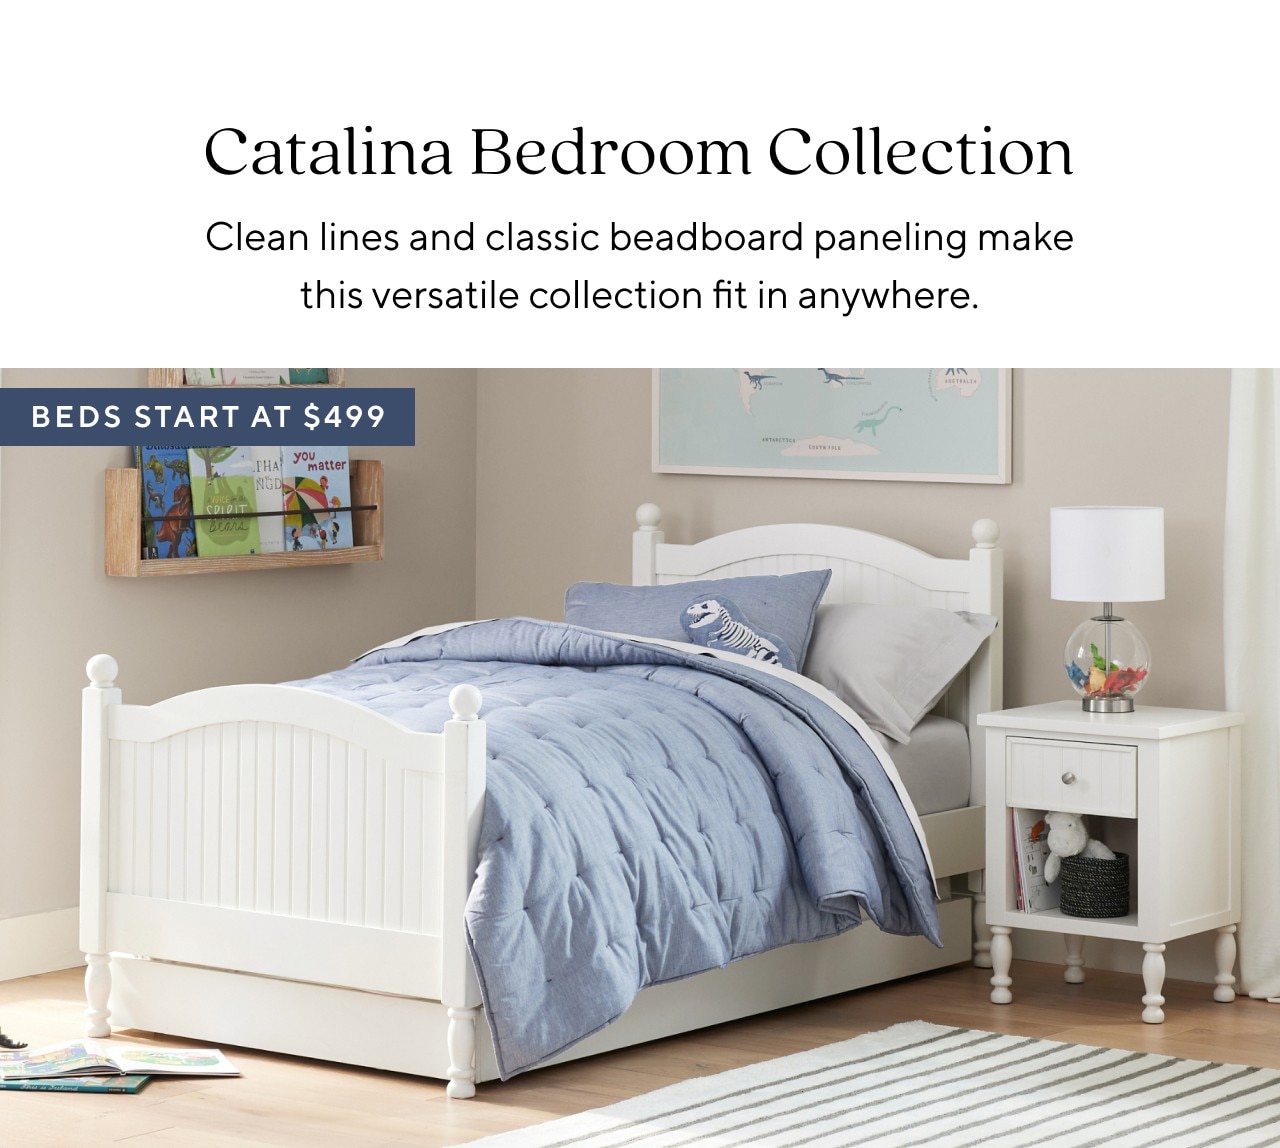 CATALINA BEDROOM COLLECTION